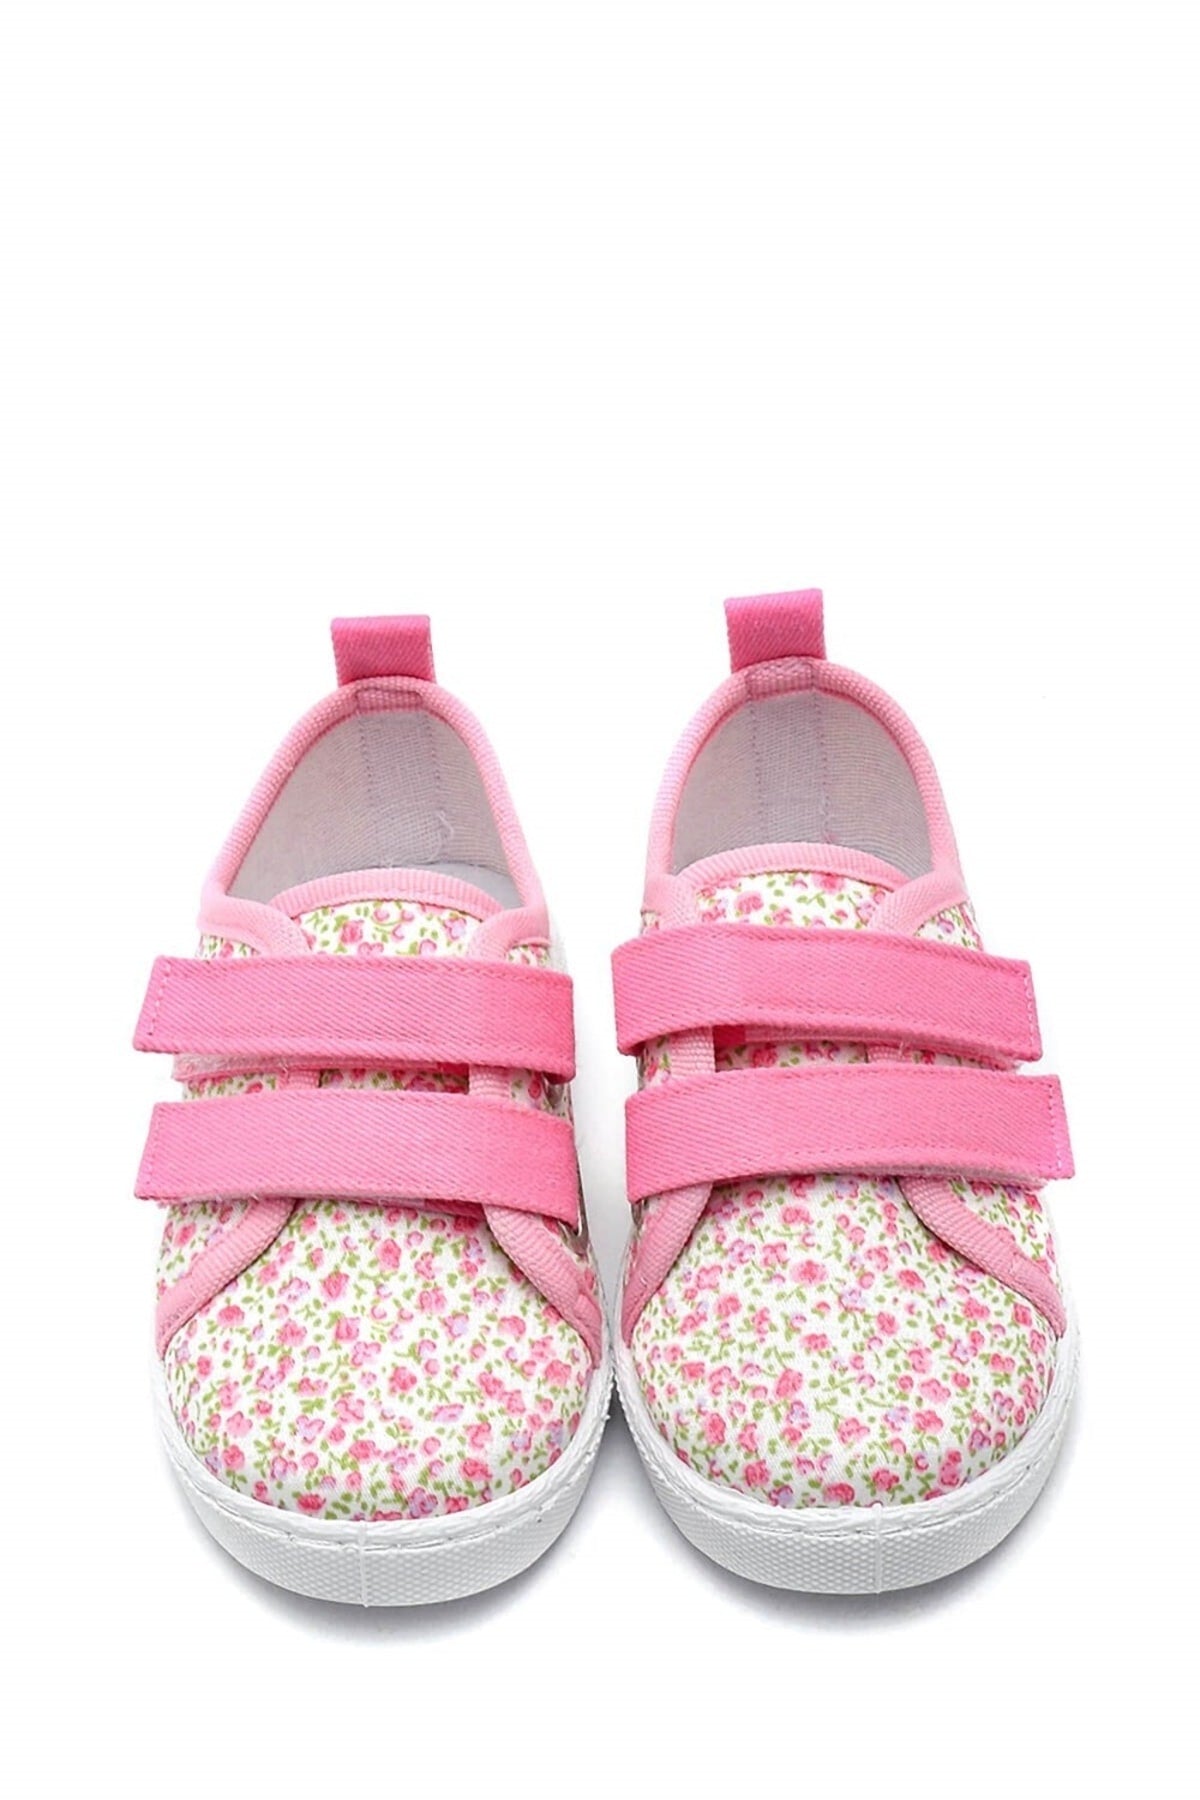 Floral Patterned Double Velcro Linen Children's Sports Shoes-pink-f-498